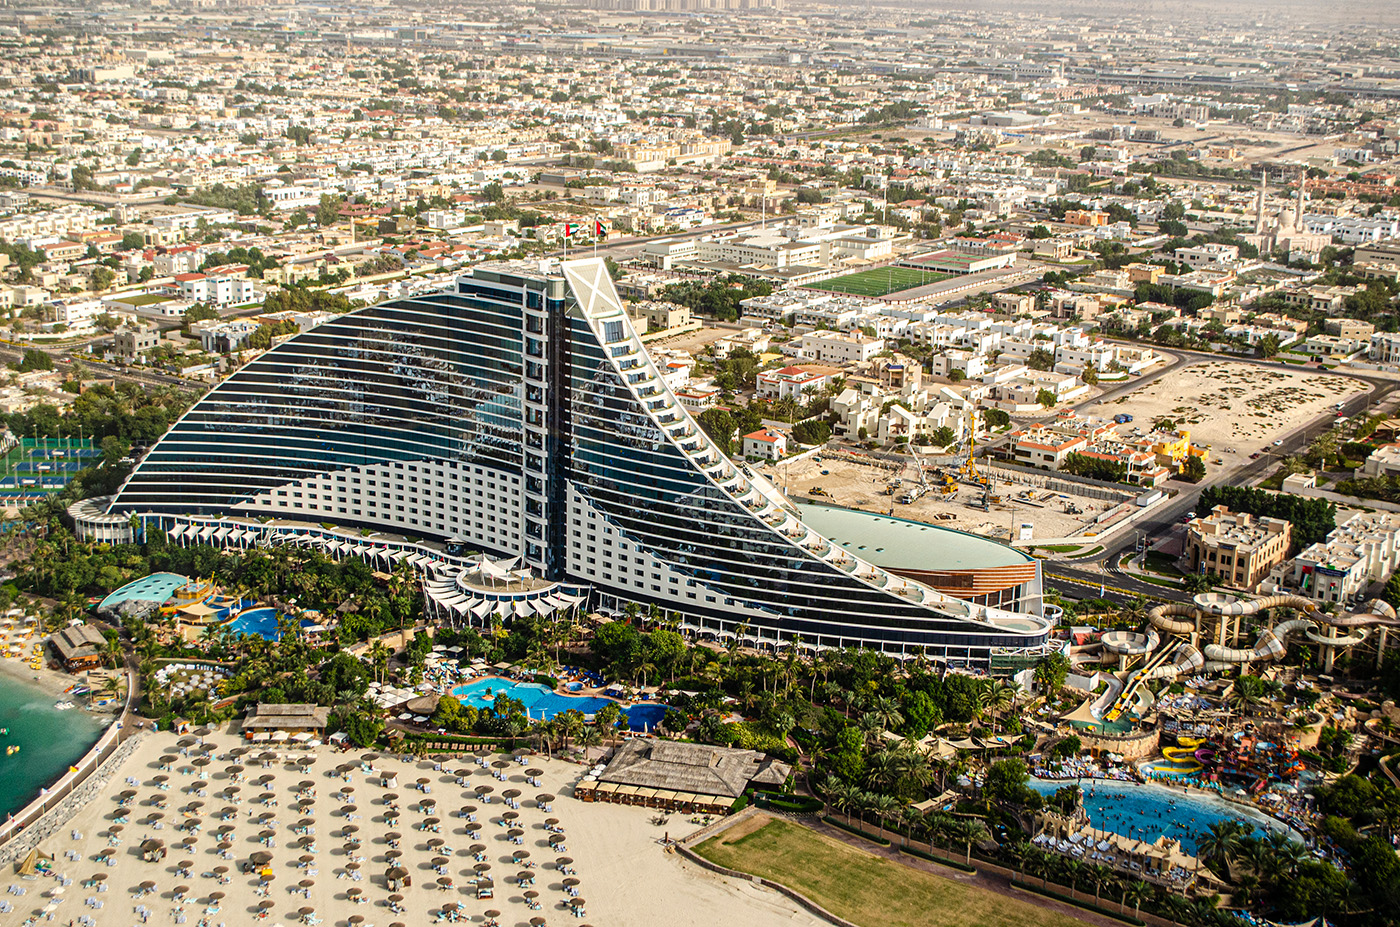 Jumeirah Beach Resort and surrounding area from above